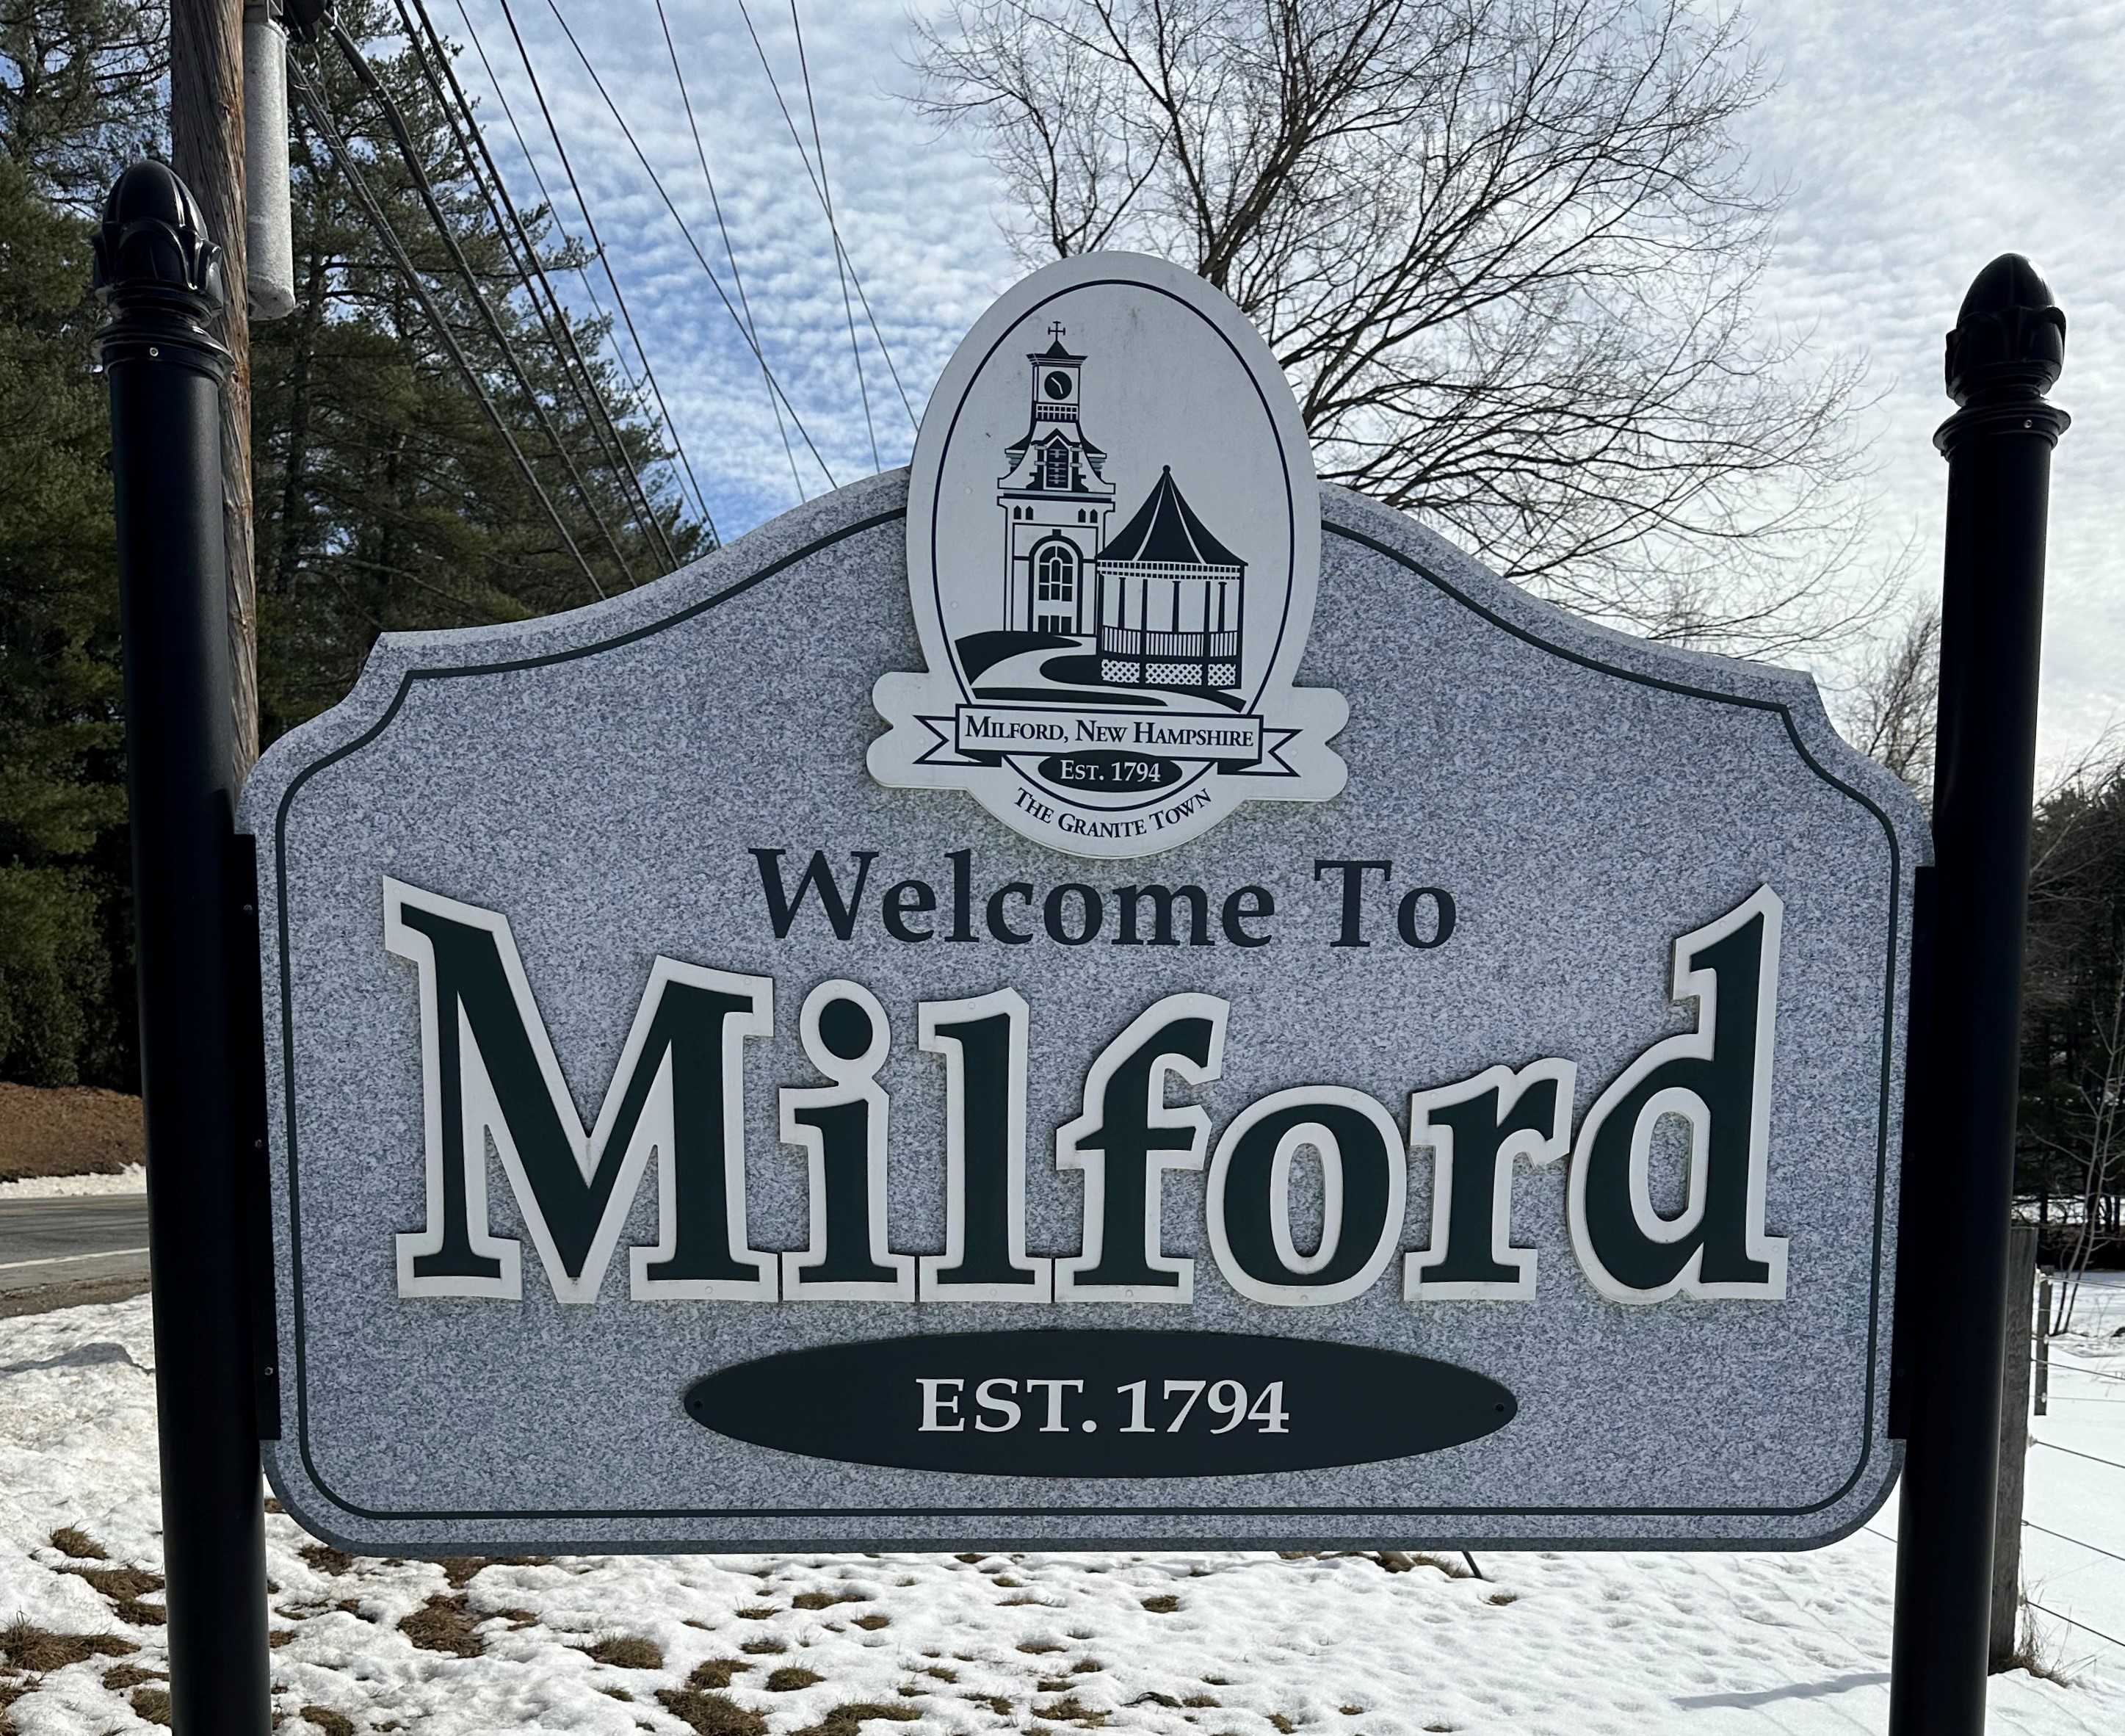 This is a photo of the Milford twon sign, which is held up by two black signposts, and which contains at the top an illustration of a gazebo and a church or similar towered building, a banner that says 'Milford, New Hampshire', and underneath that a small circle which reads 'est. 1794.' Underneath both of these is a small